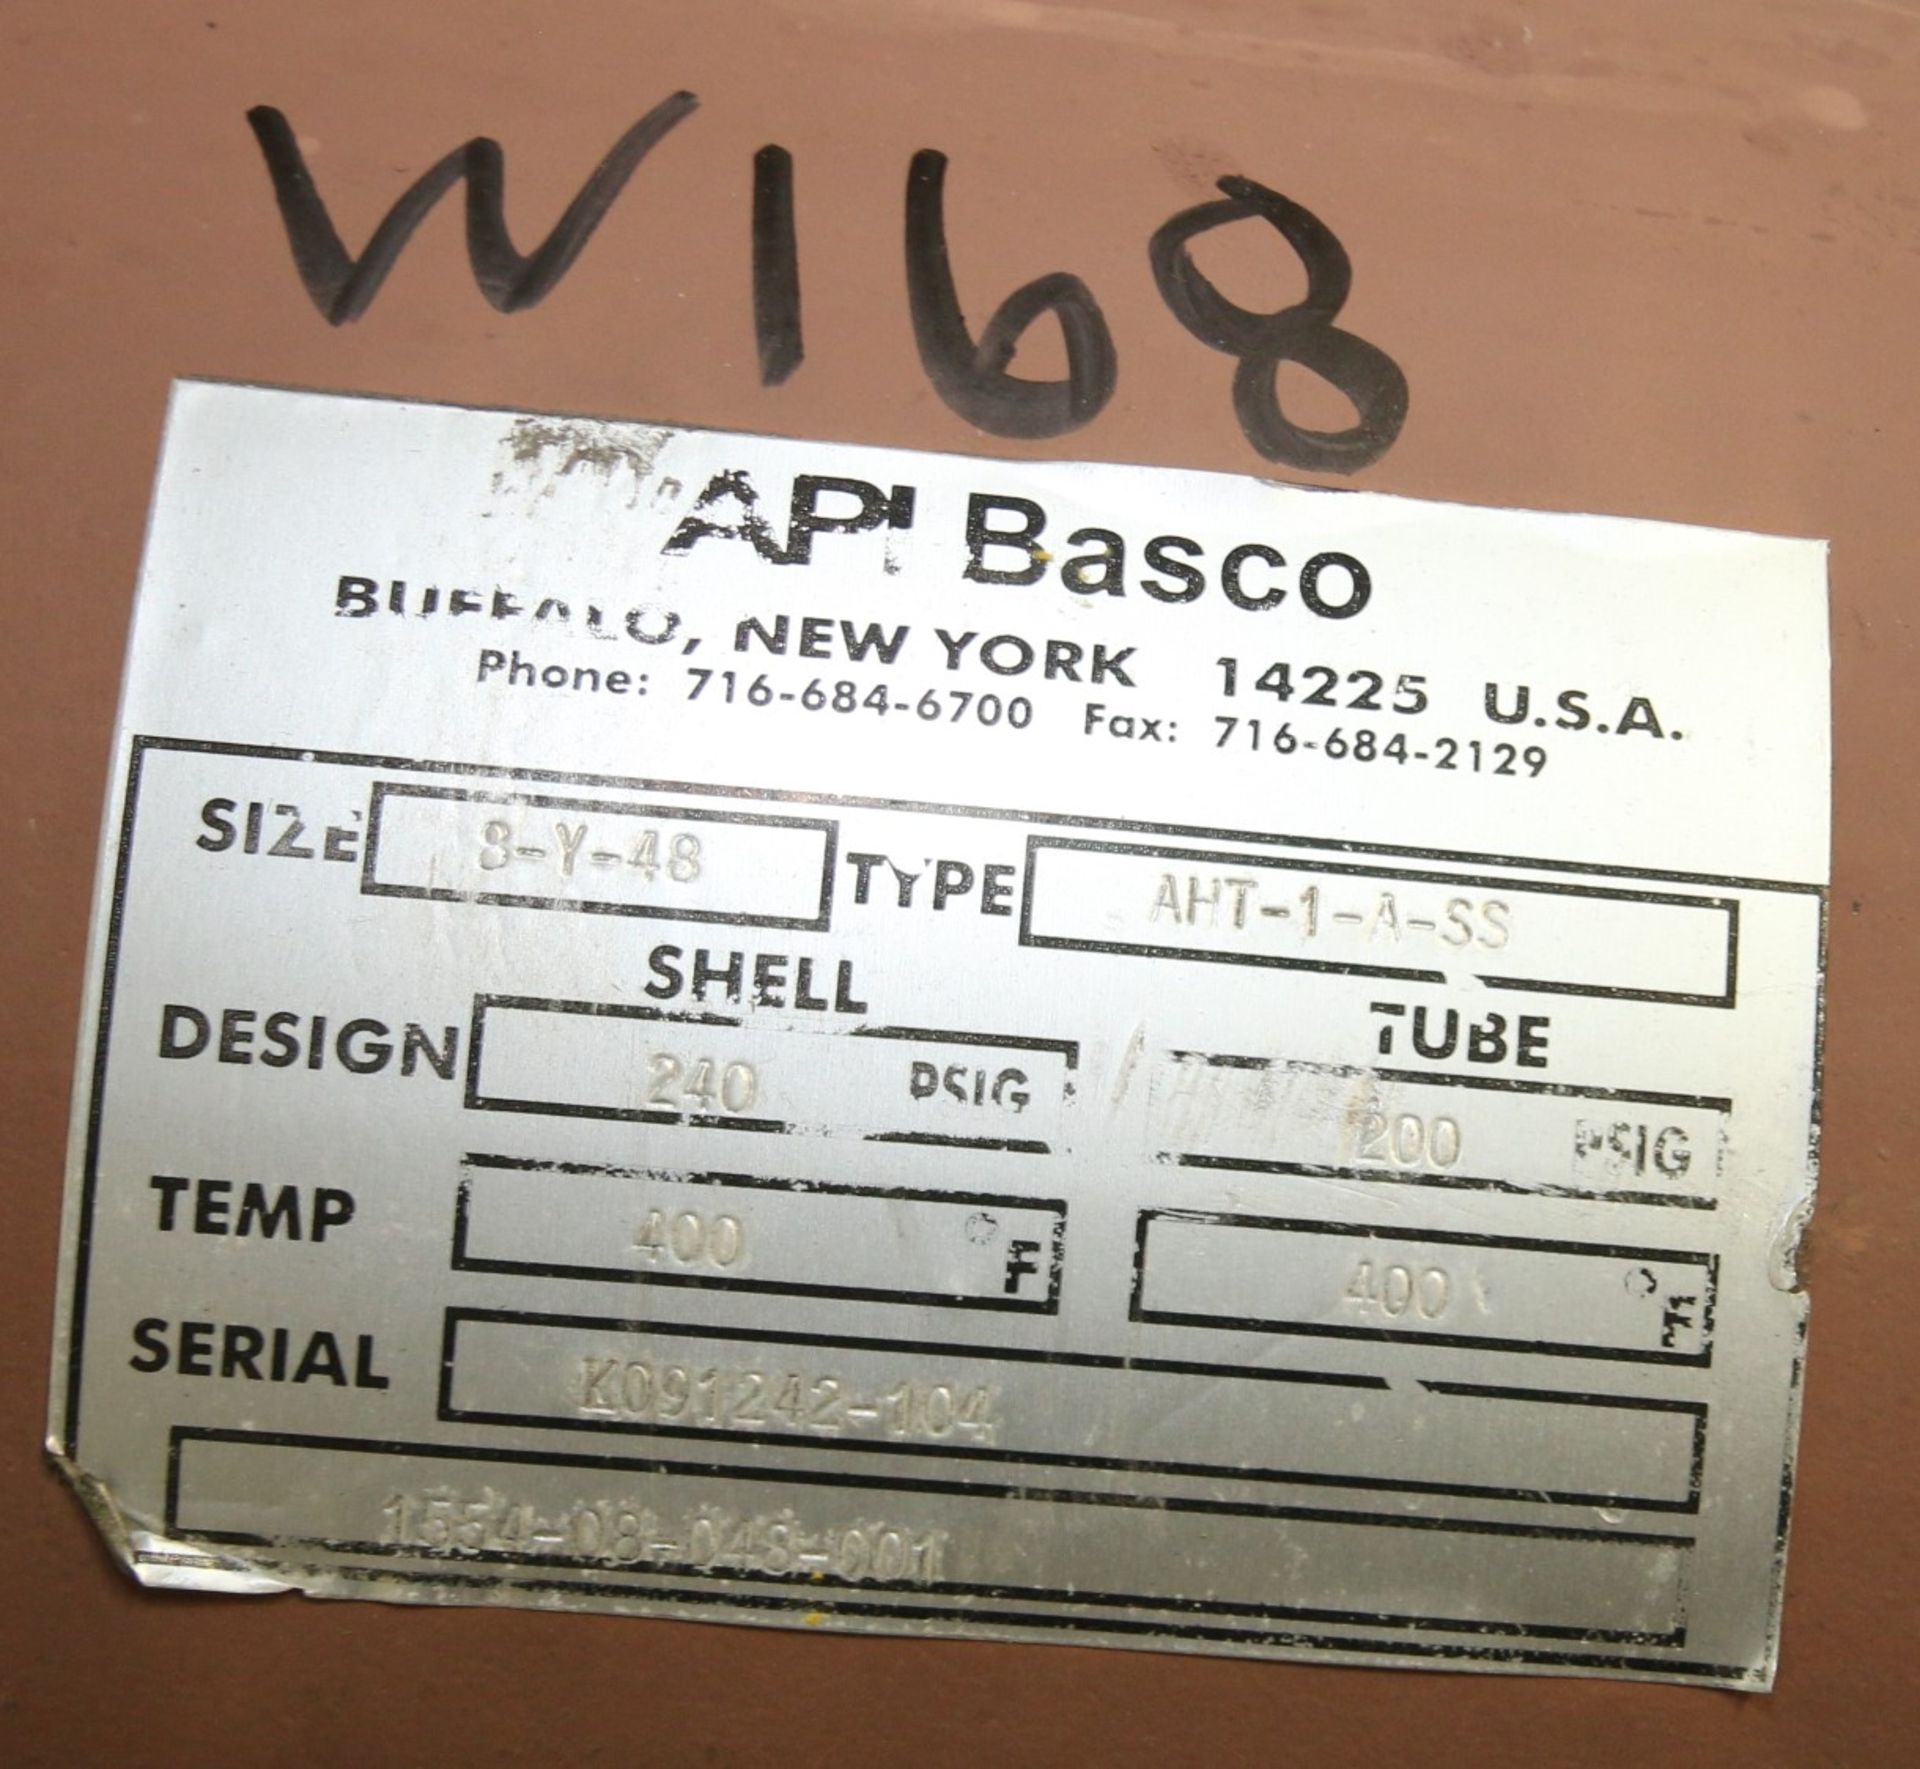 API Basco 4 ft L x 8" W Shell & Tube Heat Exchanger, with S/S Bundle, Type 8-Y-48, Type AHT-1-A- - Image 4 of 4